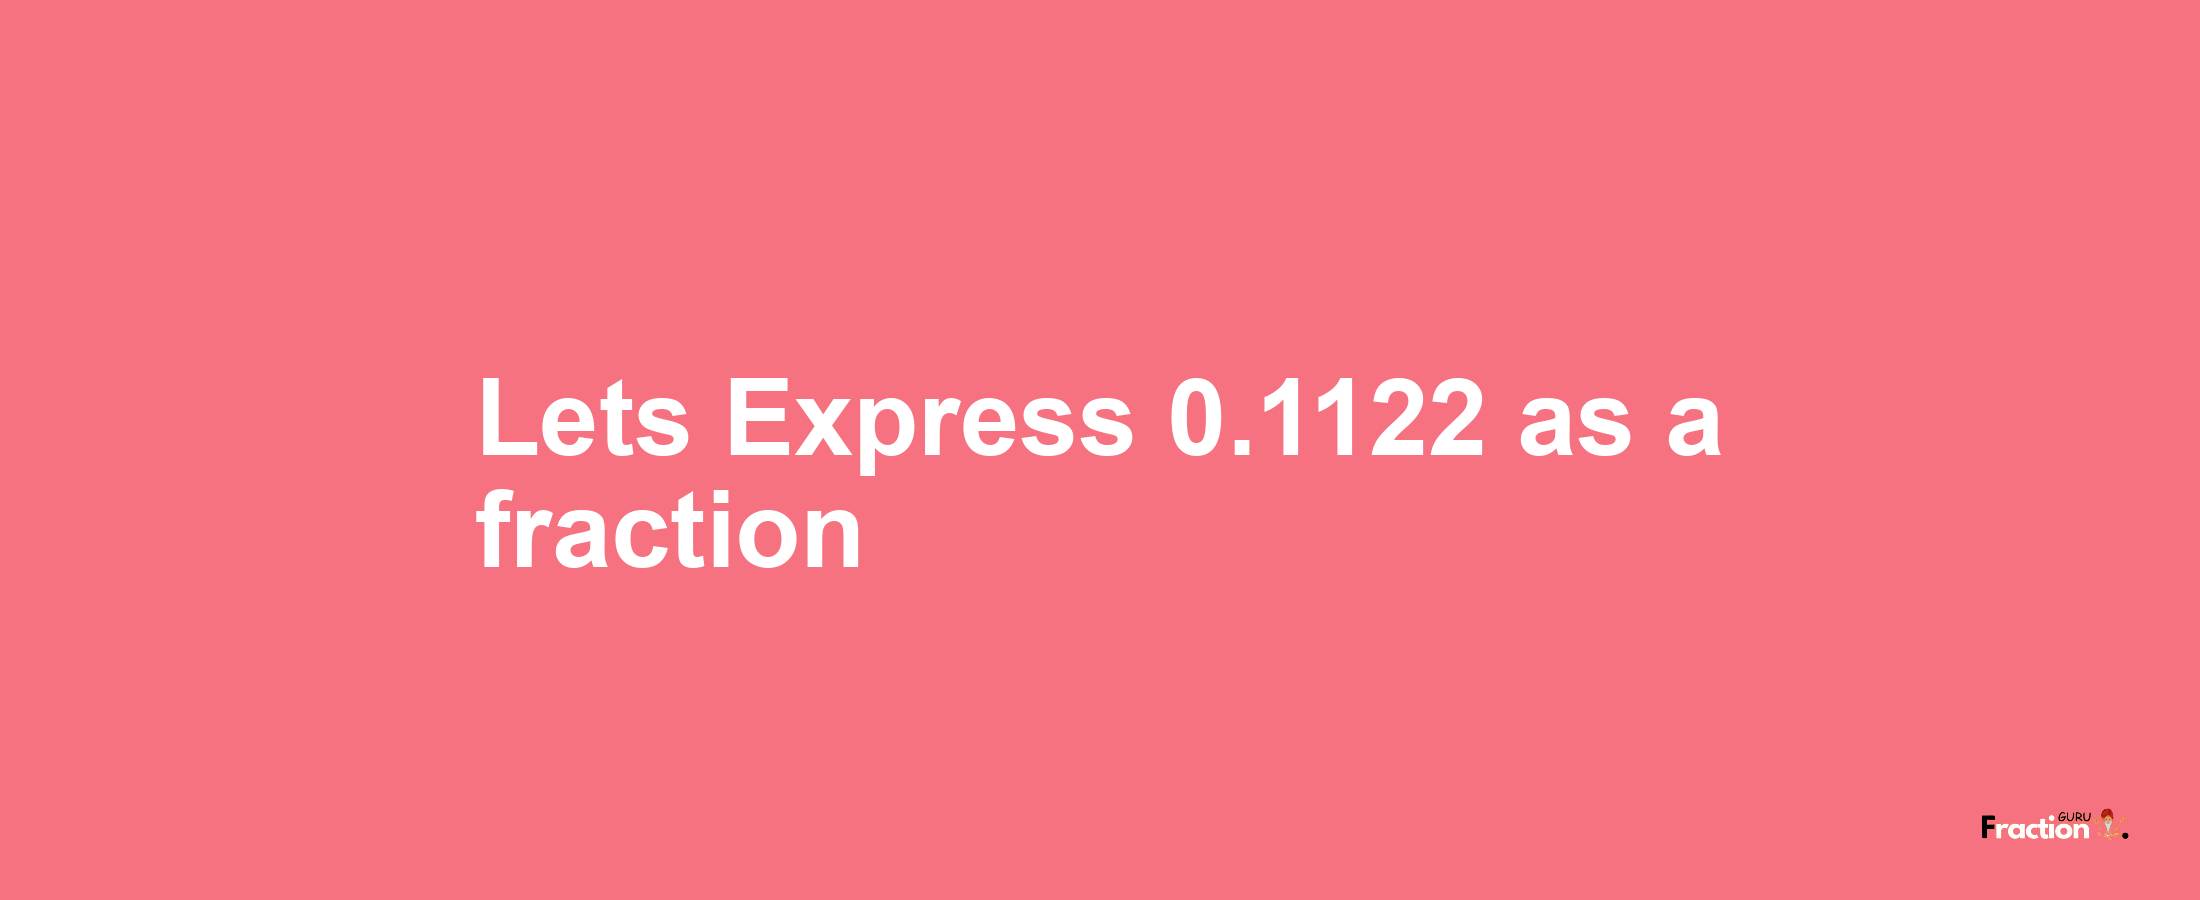 Lets Express 0.1122 as afraction